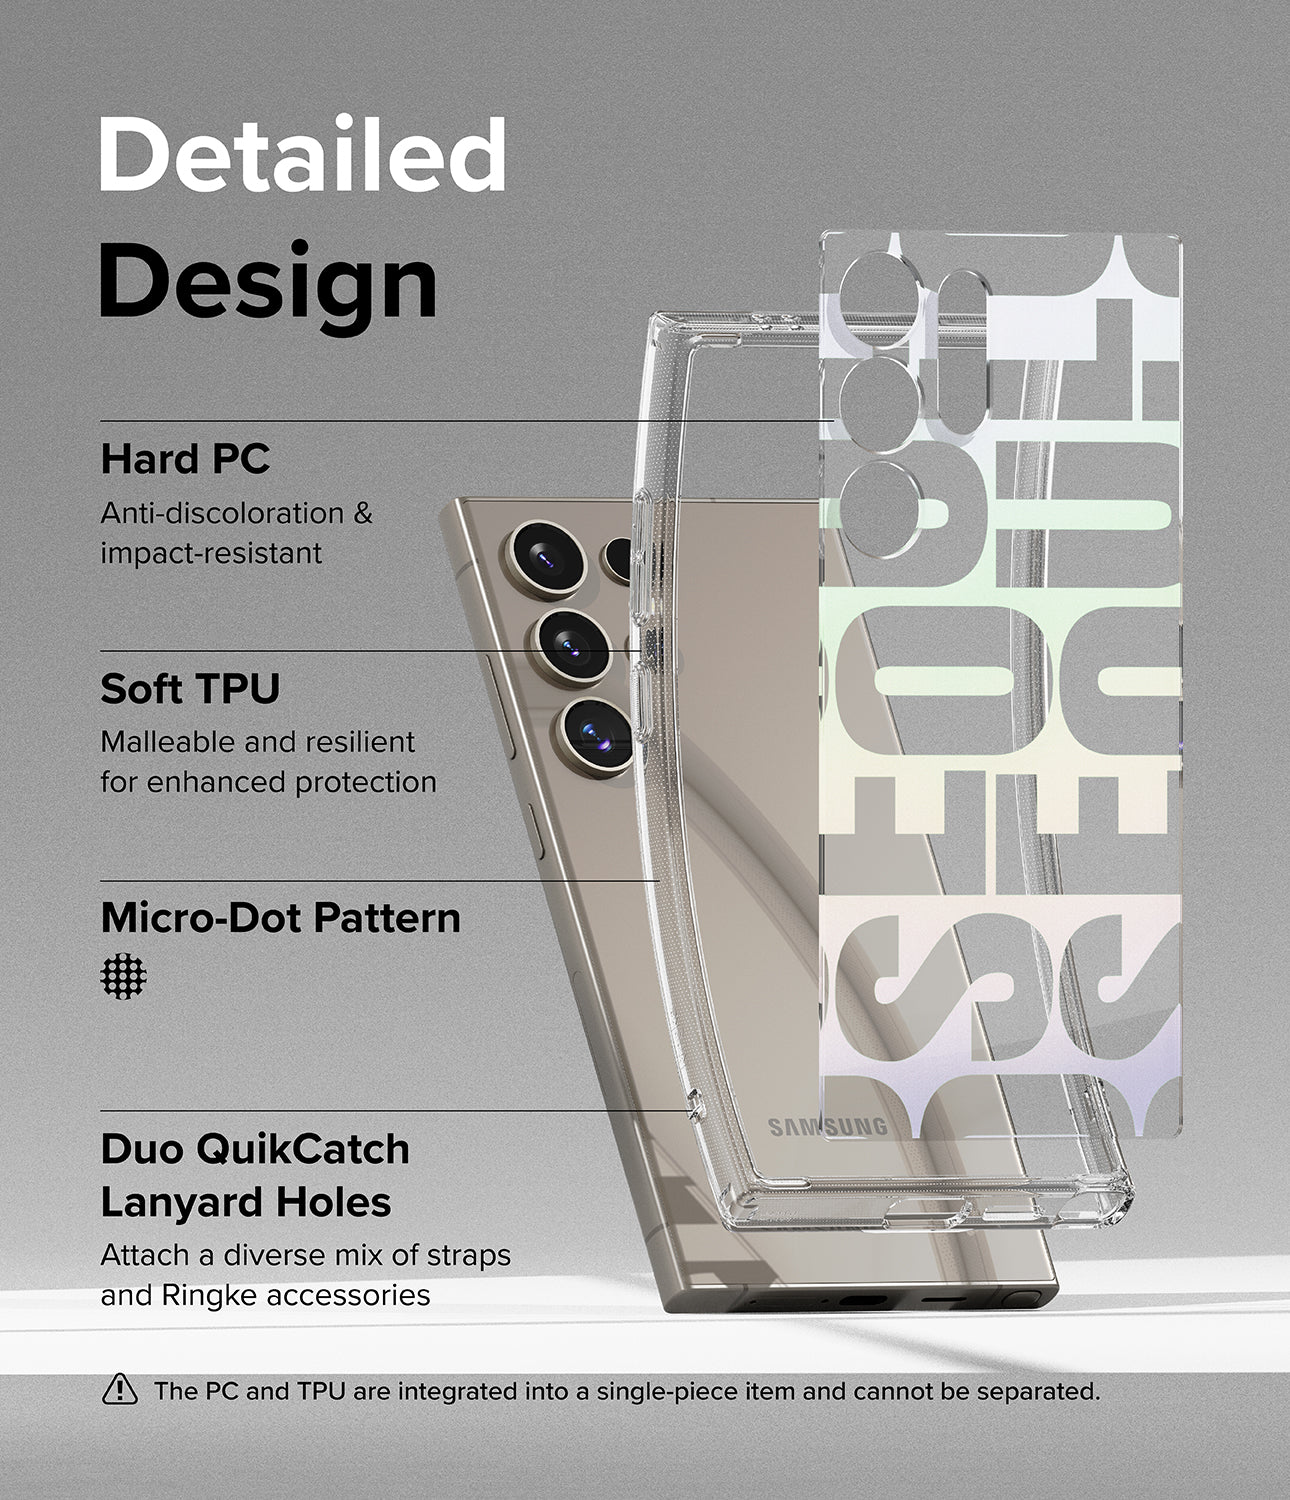 Galaxy S24 Ultra Case | Fusion Design - Seoul - Detailed Design. Anti-discoloration and impact-resistant with Hard PC. Malleable and resilient for enhanced protection with Soft TPU. Micro-Dot Pattern. Attach a diverse mix of straps and Ringke accessories with Duo QuikCatch Lanyard Holes.